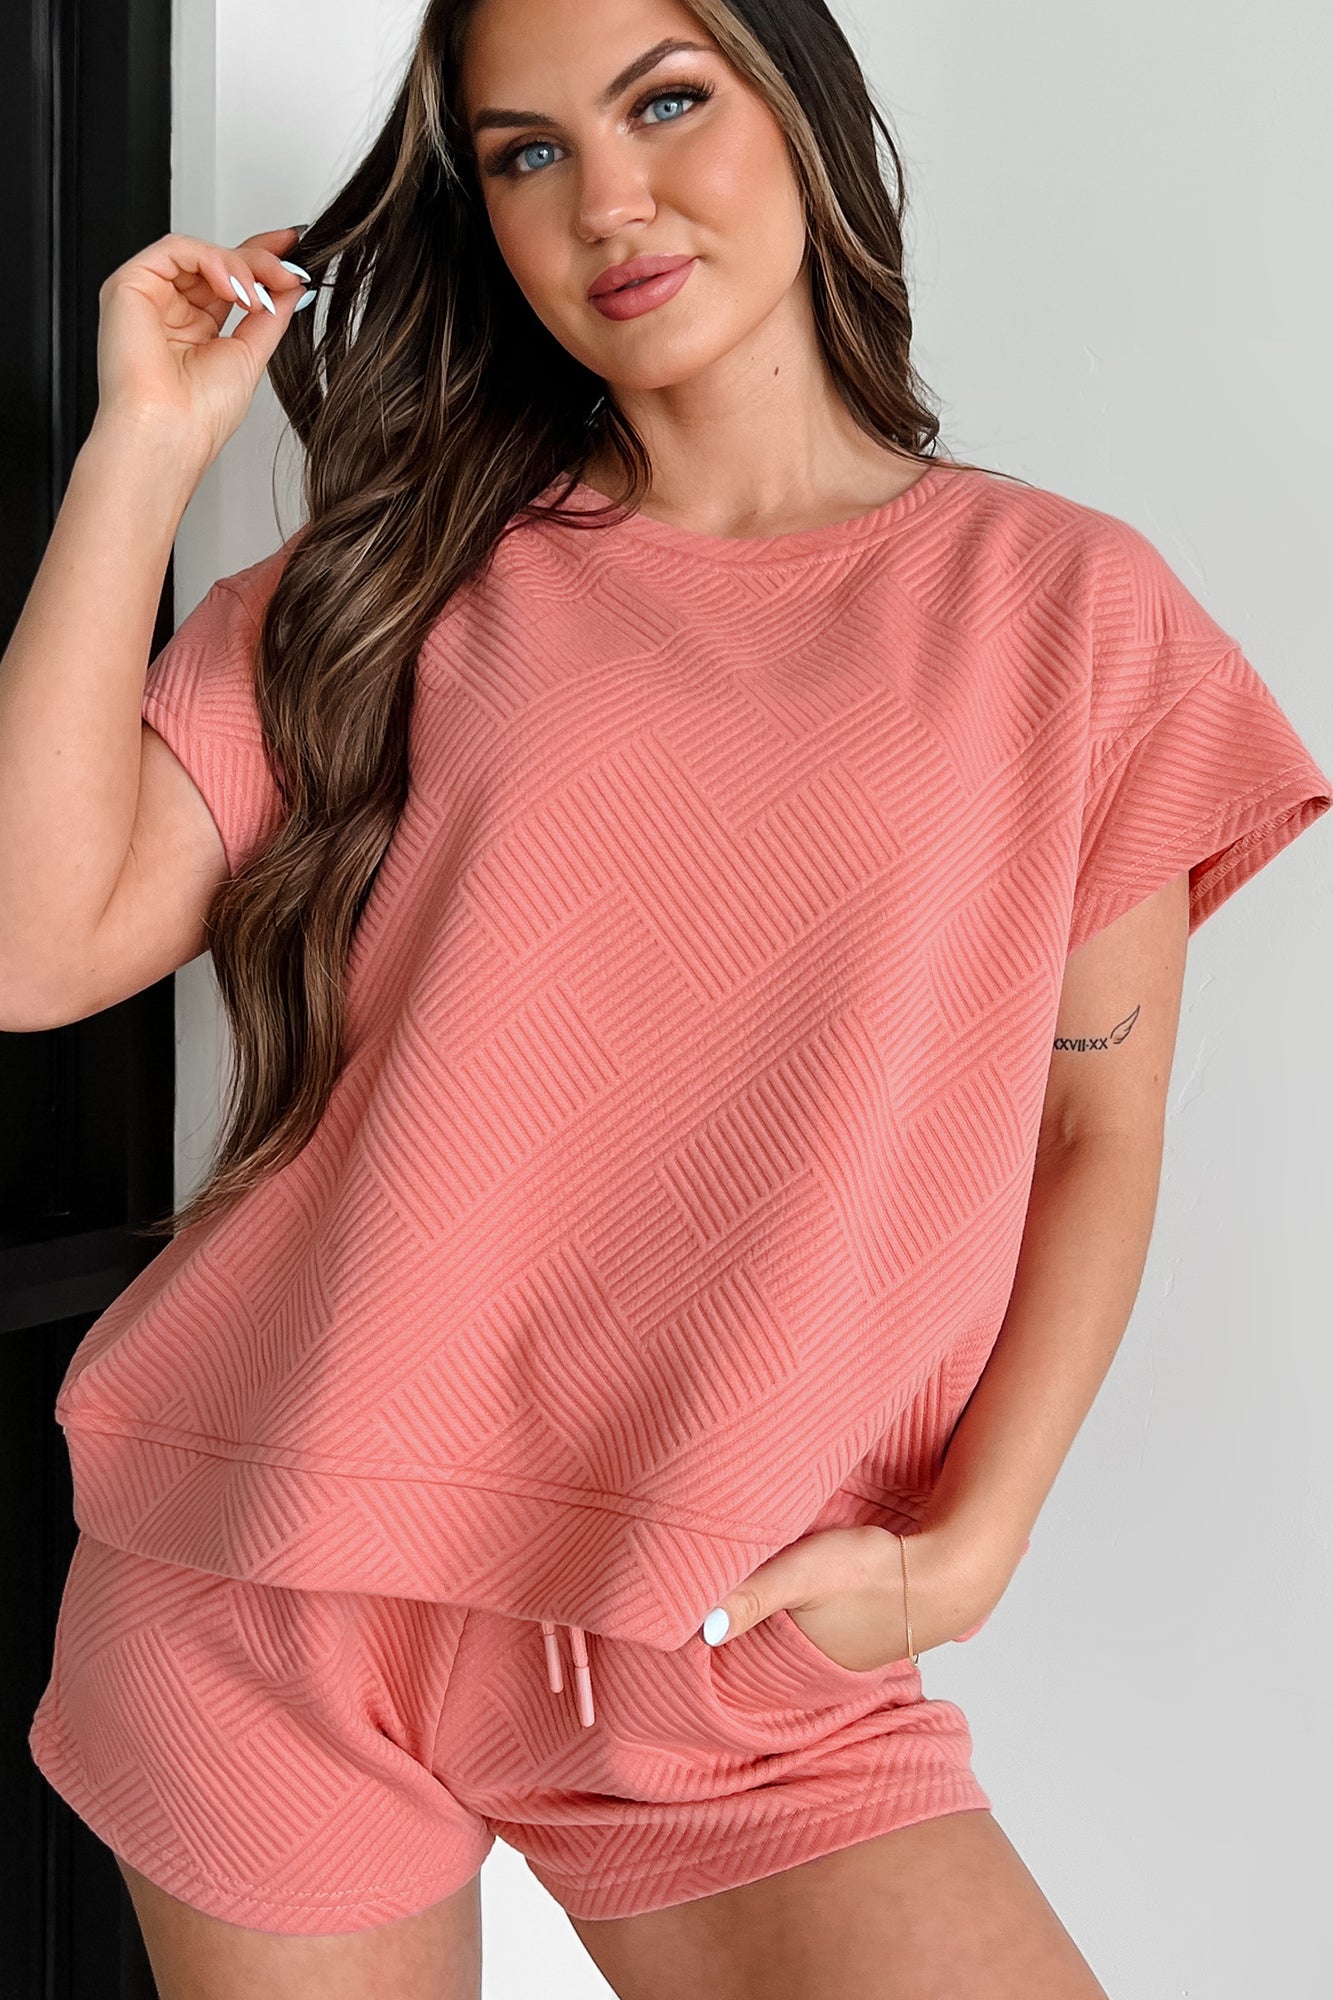 Cool & Collected Oversized Geometric Top (Coral Pink) - NanaMacs